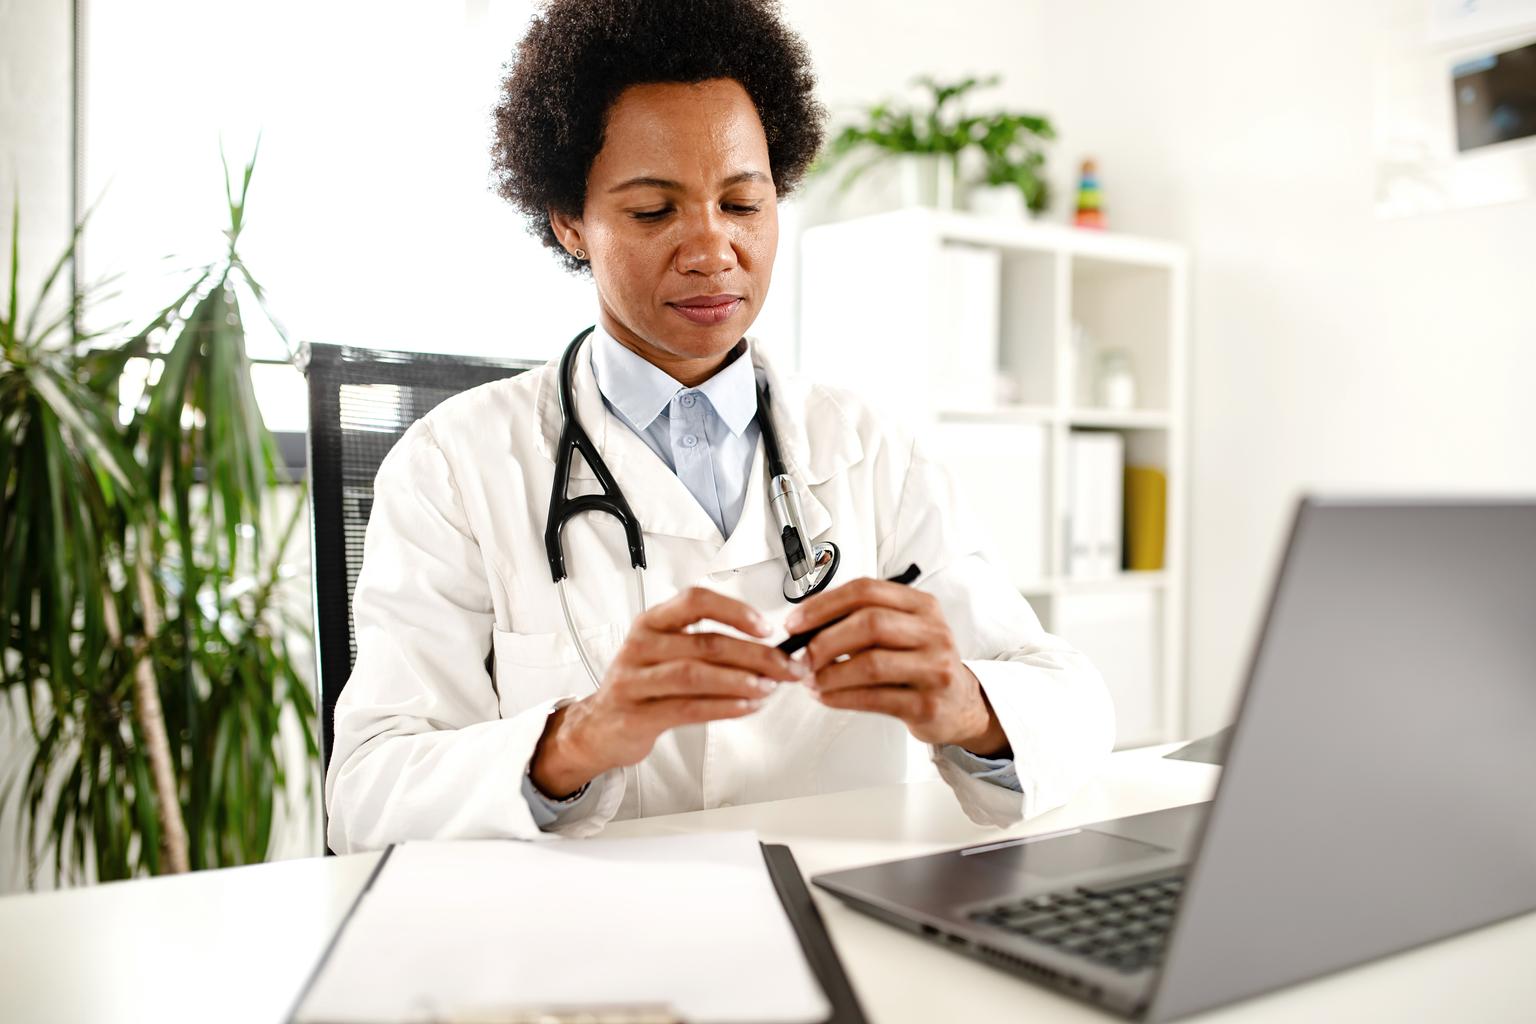 Telehealth evolution: Three opportunities for supporting the success and longevity of virtual care